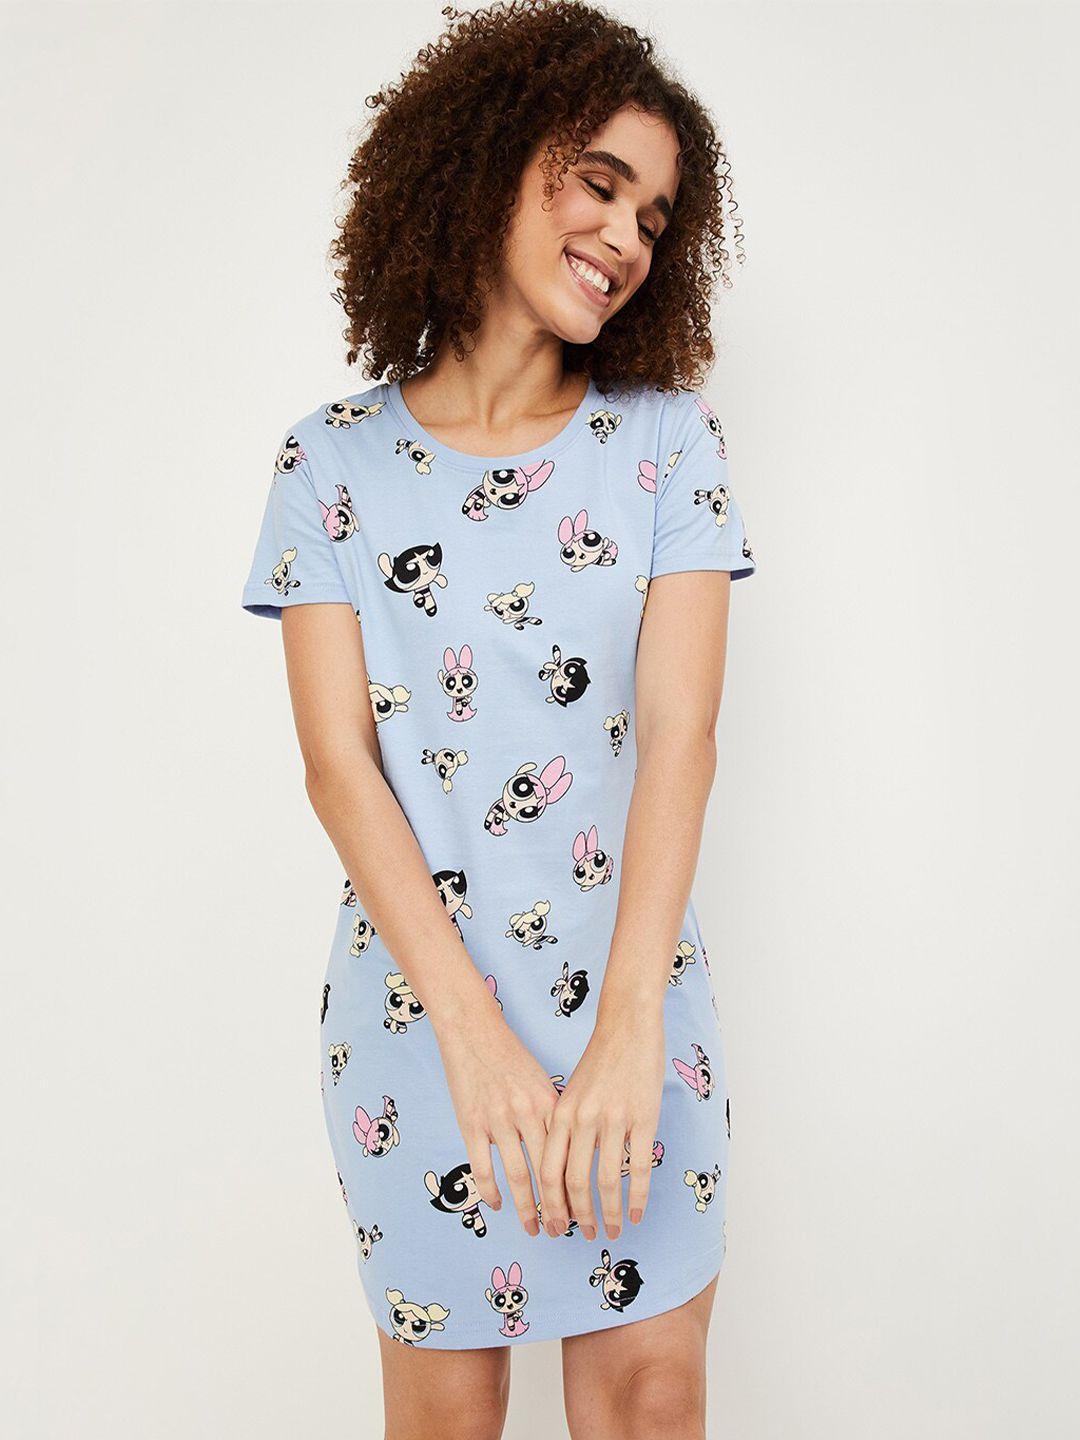 max cartoon characters printed round neck pure cotton t-shirt nightdress